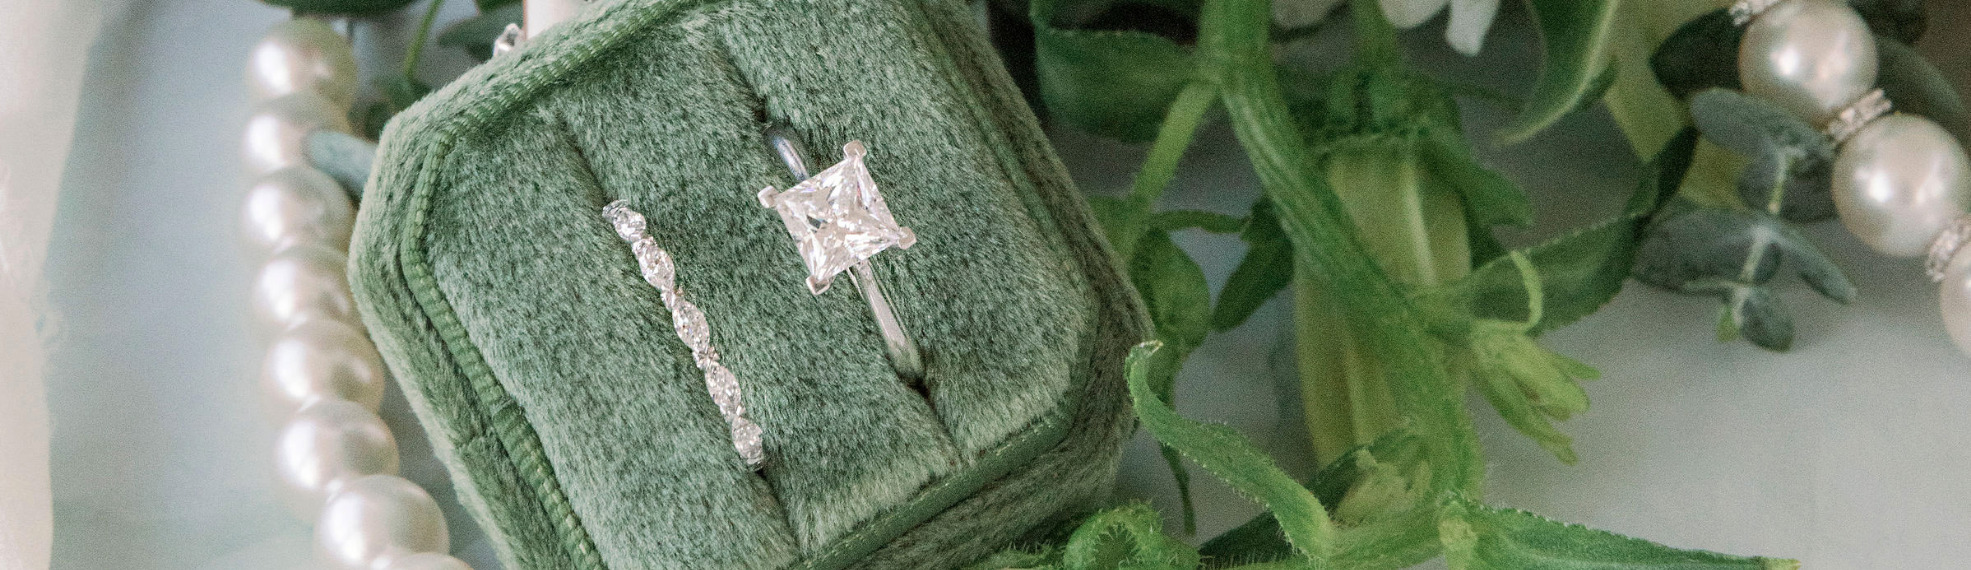 Princess cut solitaire white gold engagement ring with delicate alternating marquise and round diamond band in moss green ring box with green florals and pearls in the background